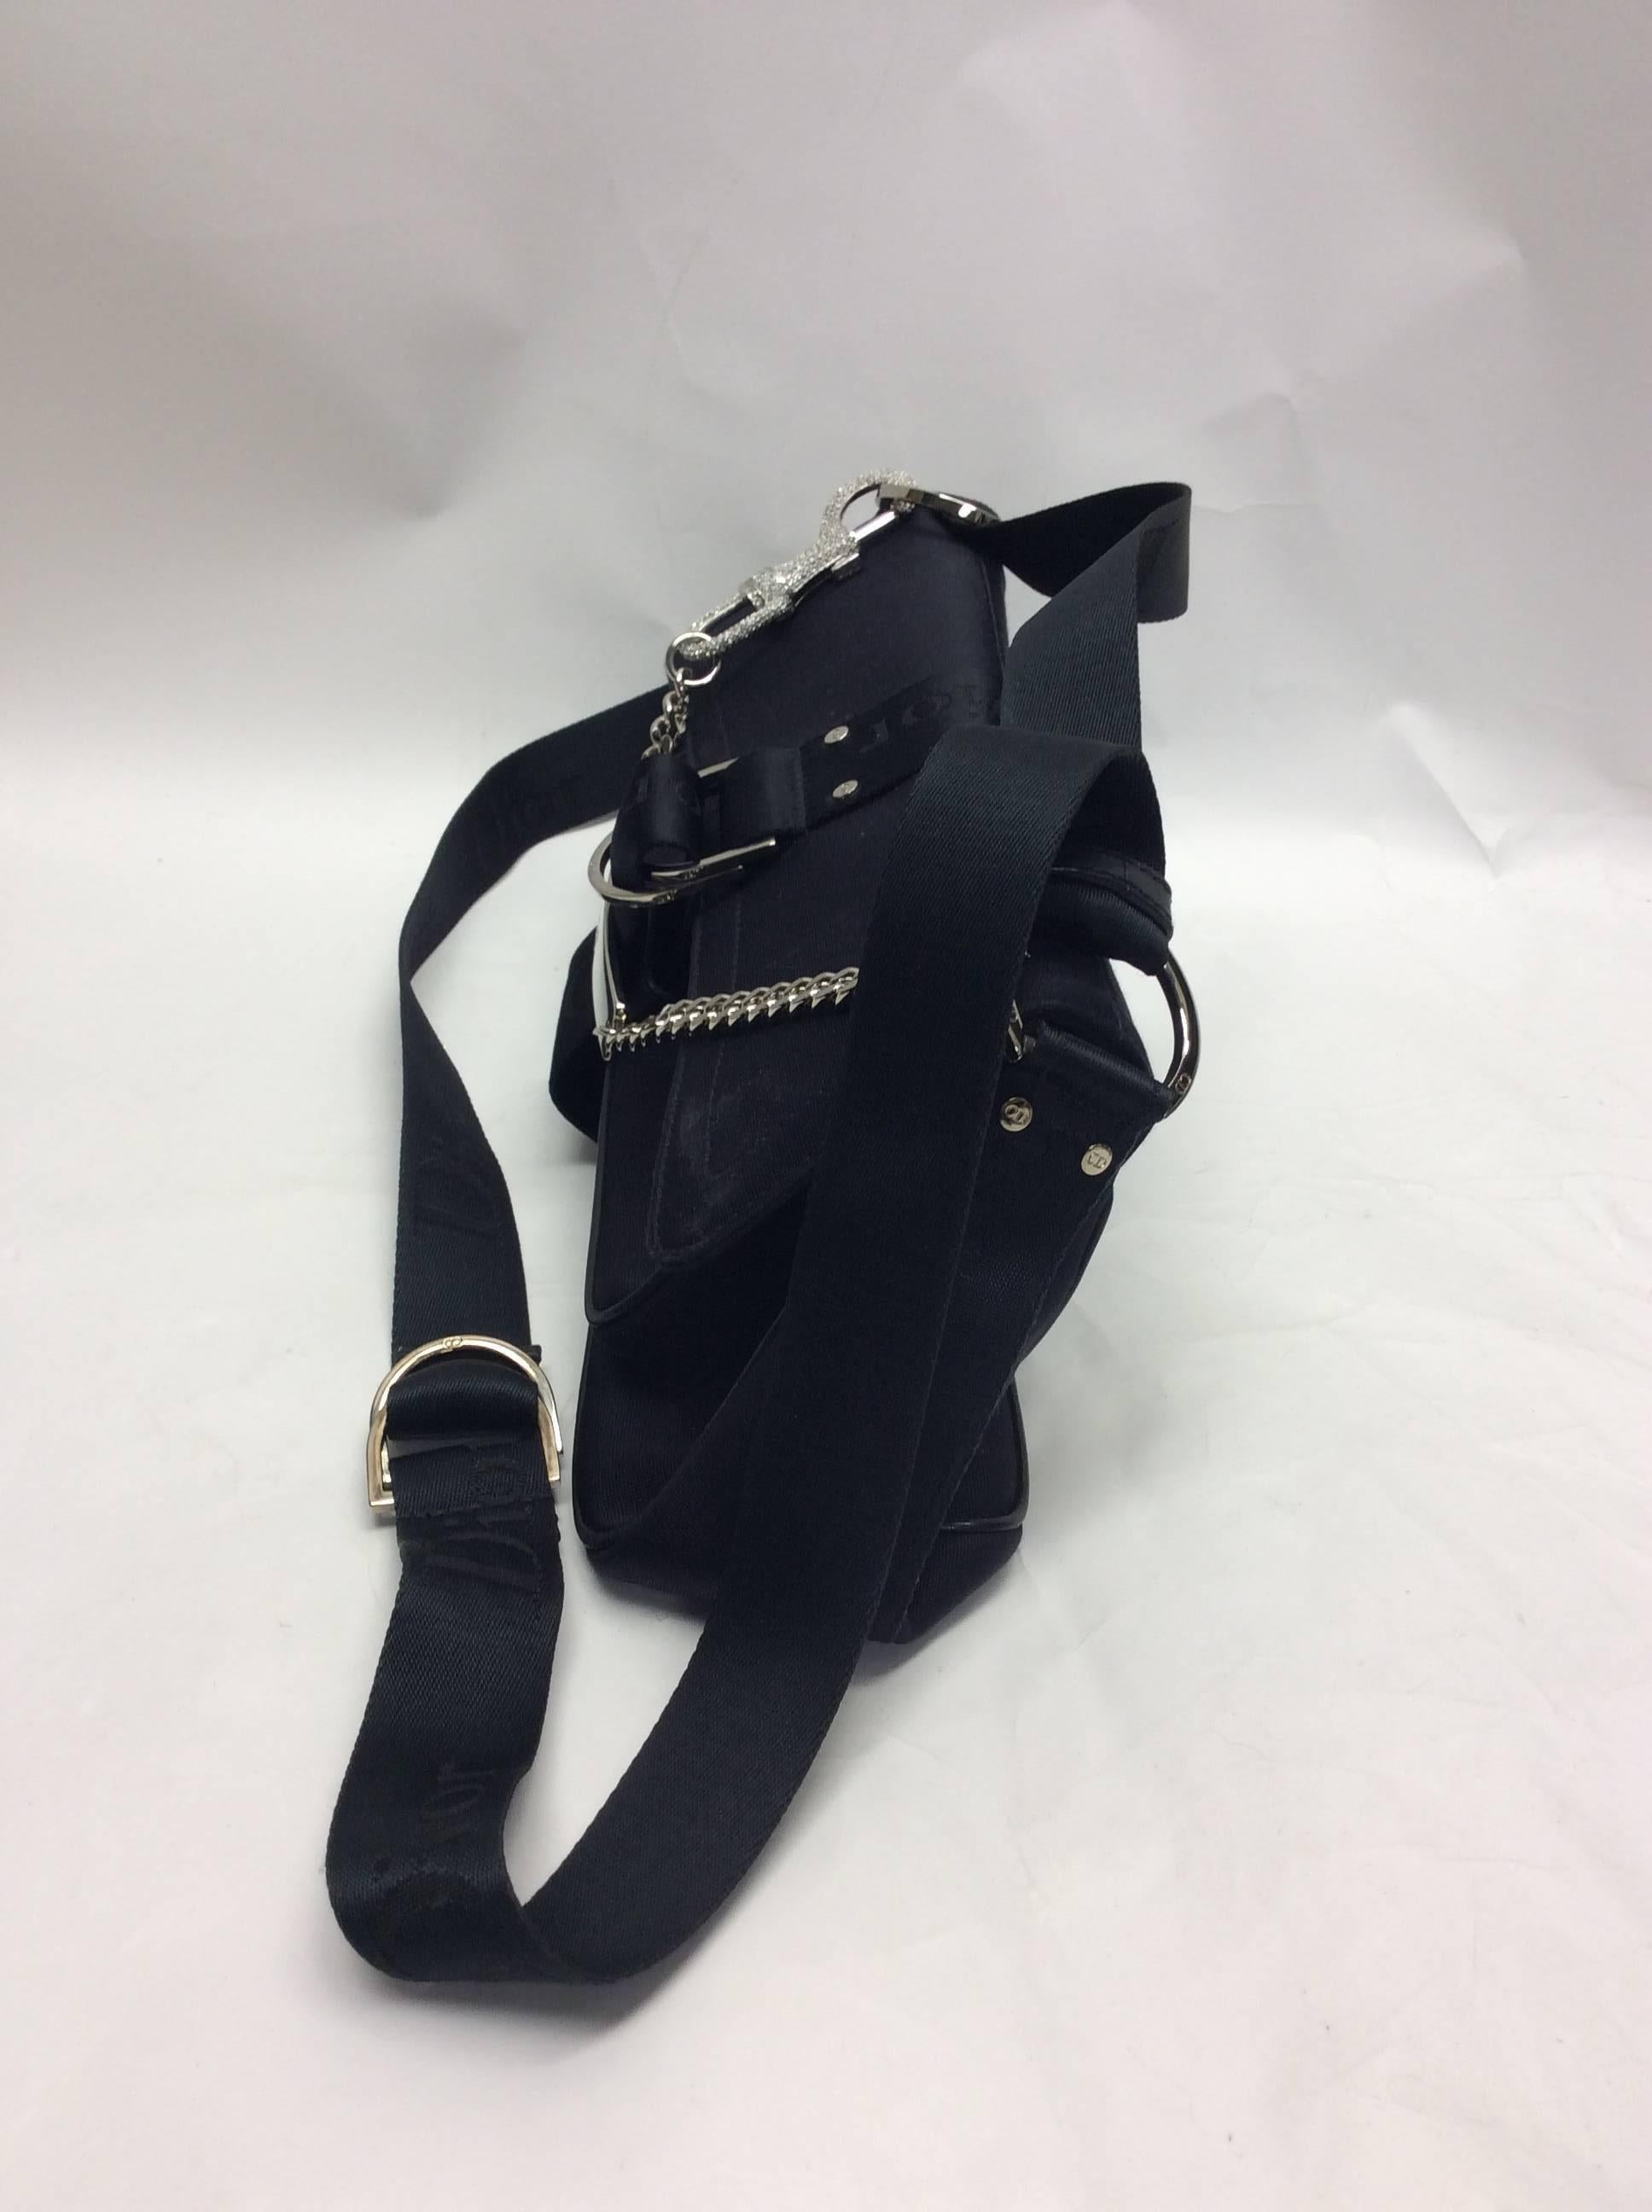 Christian Dior Black Satin Small Purse In Excellent Condition For Sale In Narberth, PA